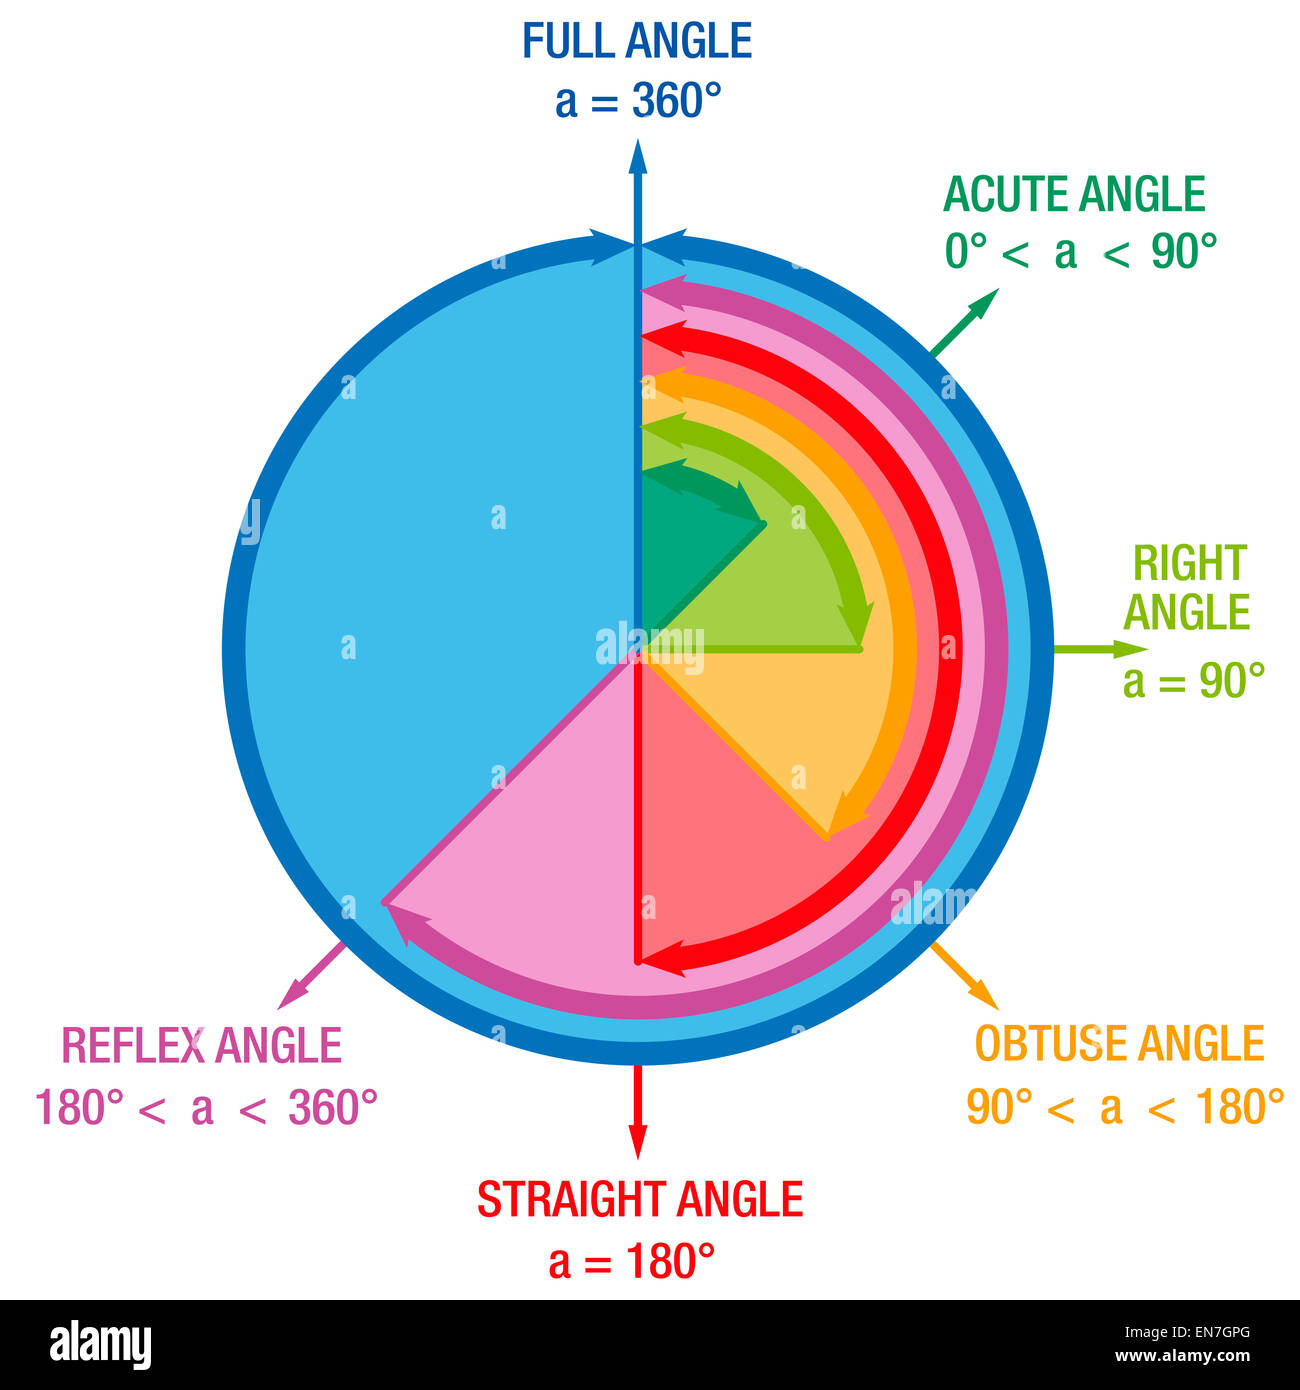 Angles from mathematics and geometry science, like ACUTE ANGLE, RIGHT ANGLE or REFLEX ANGLE. Stock Photo